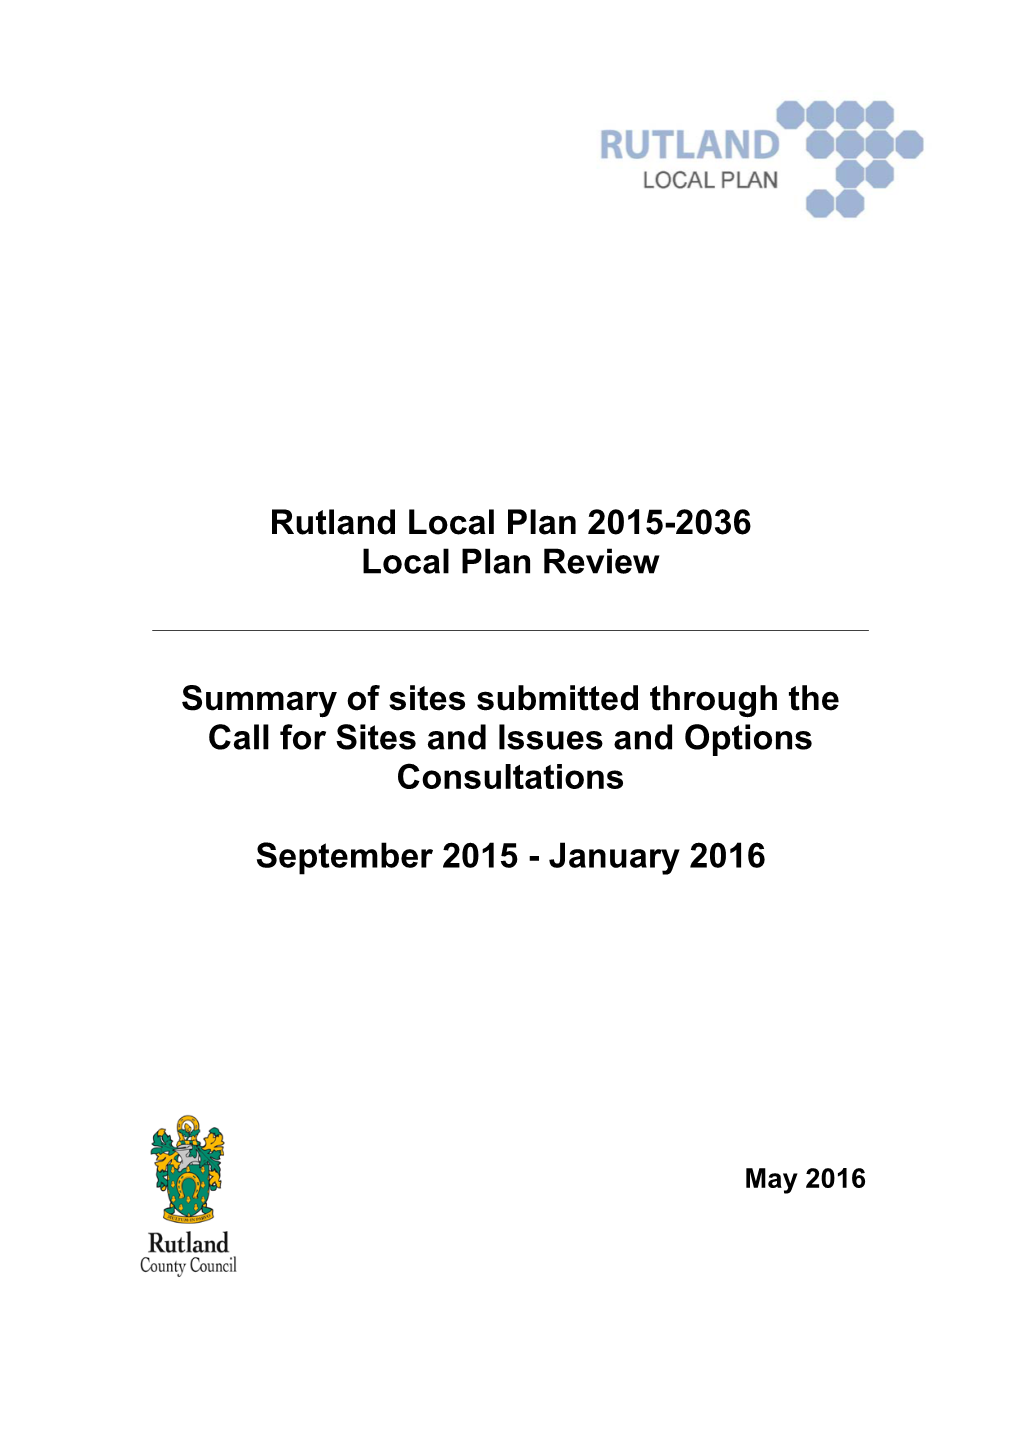 Summary of Sites Submitted Through the Call for Sites and Issues and Options Consultations